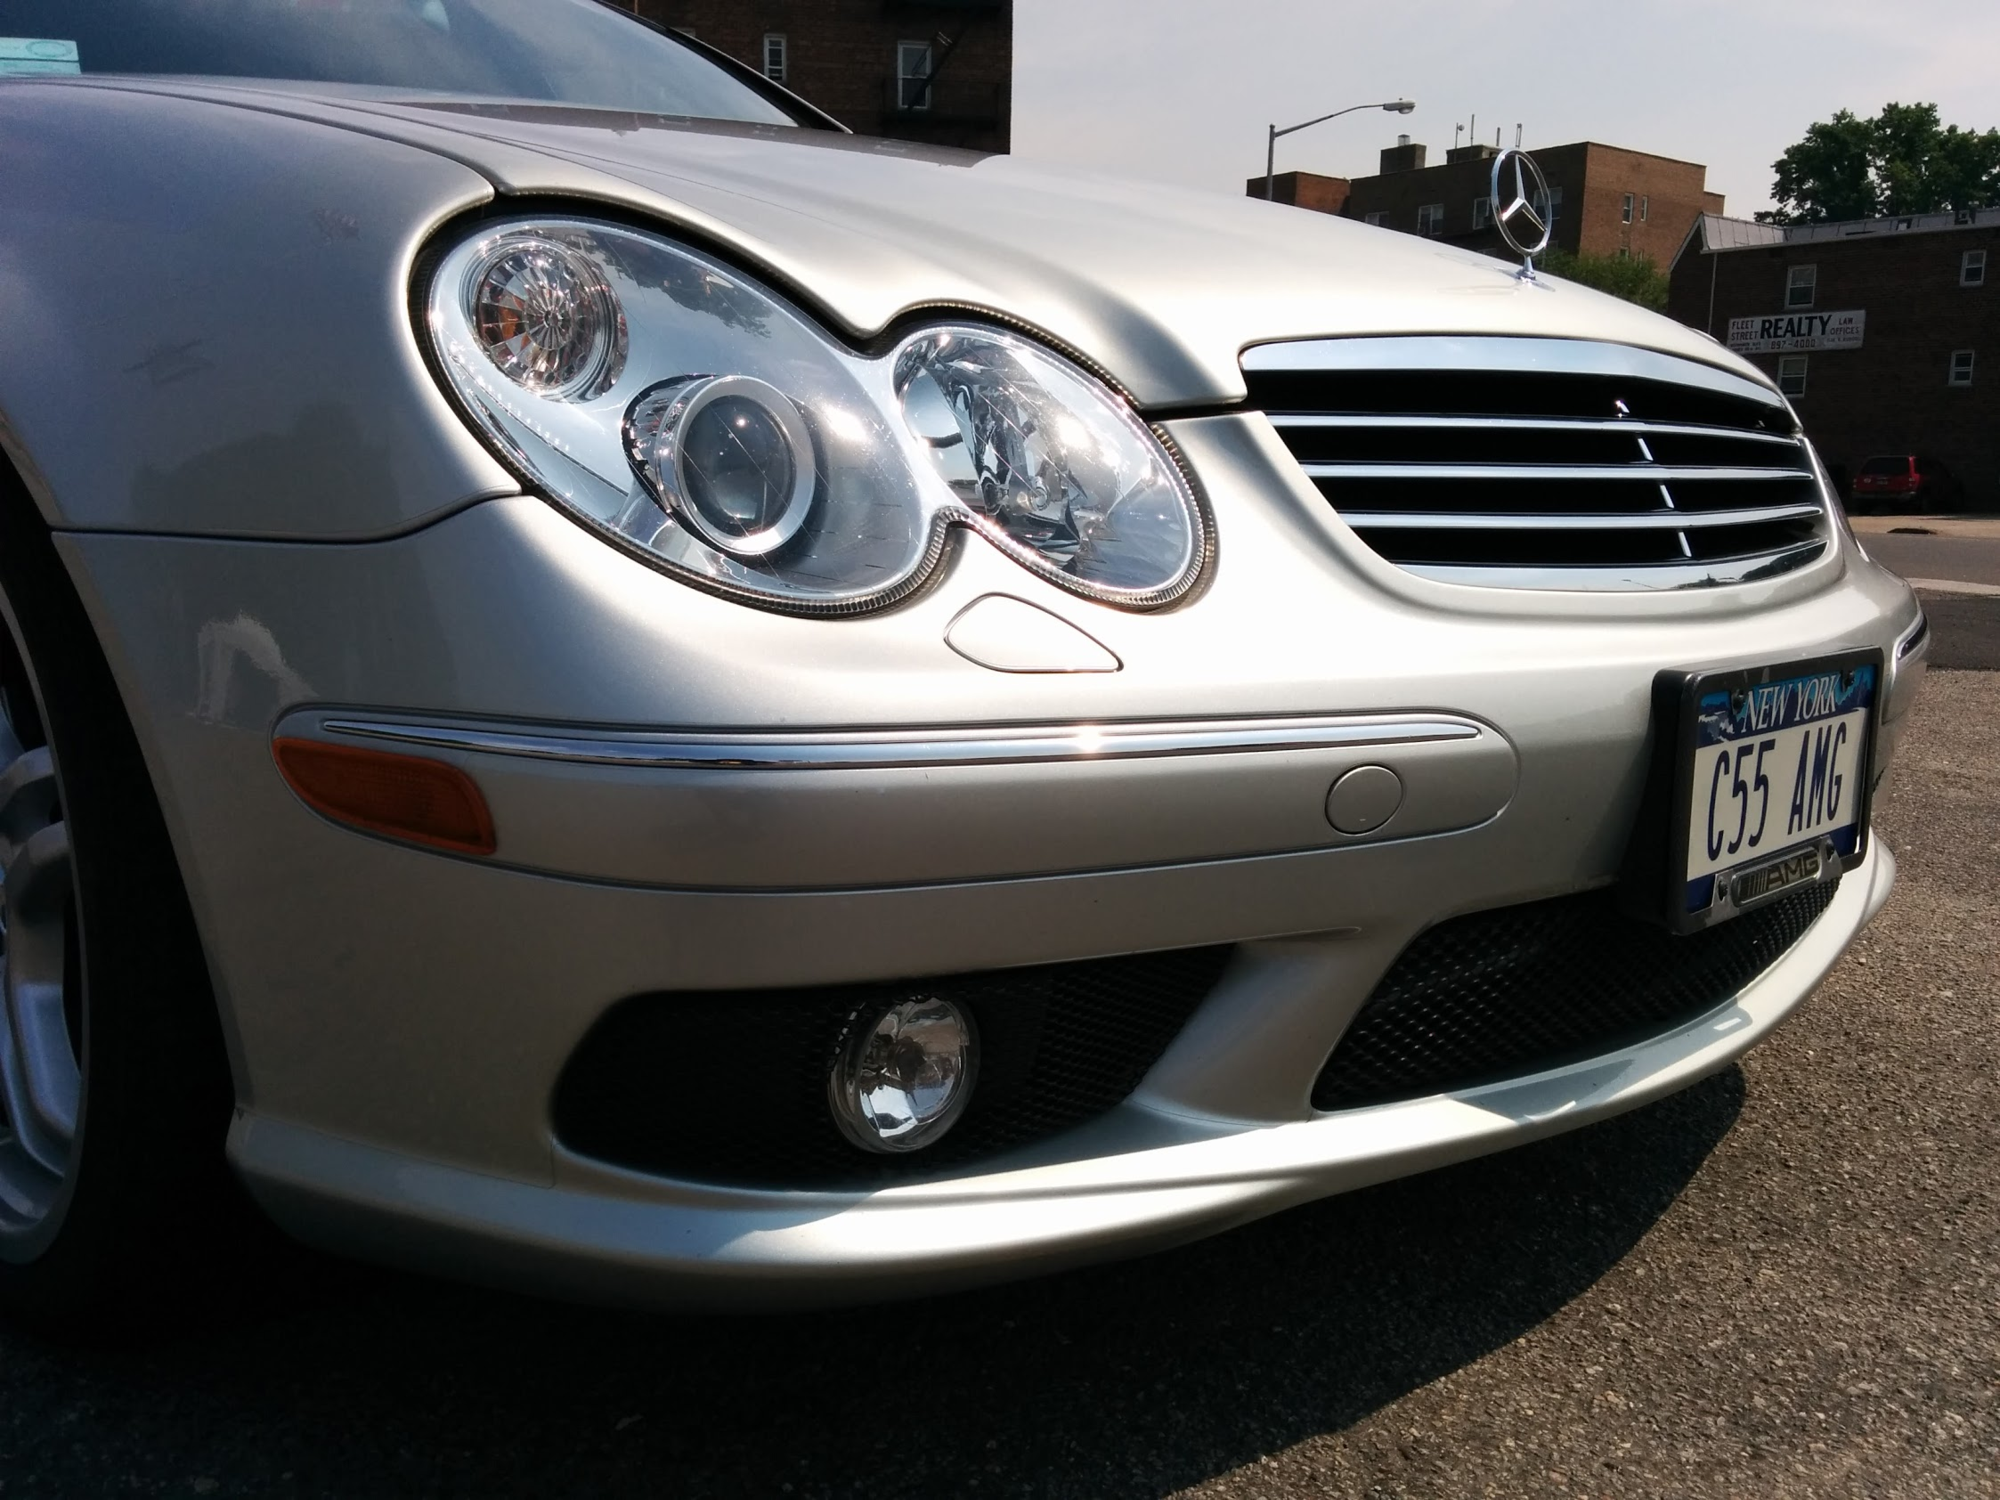 2006 Mercedes-Benz C55 AMG - Probably the world's best C55 for sale right now - Used - VIN WDBRF76J26F736960 - 44,100 Miles - 8 cyl - 2WD - Automatic - Sedan - Silver - Rego Park, NY 11374, United States